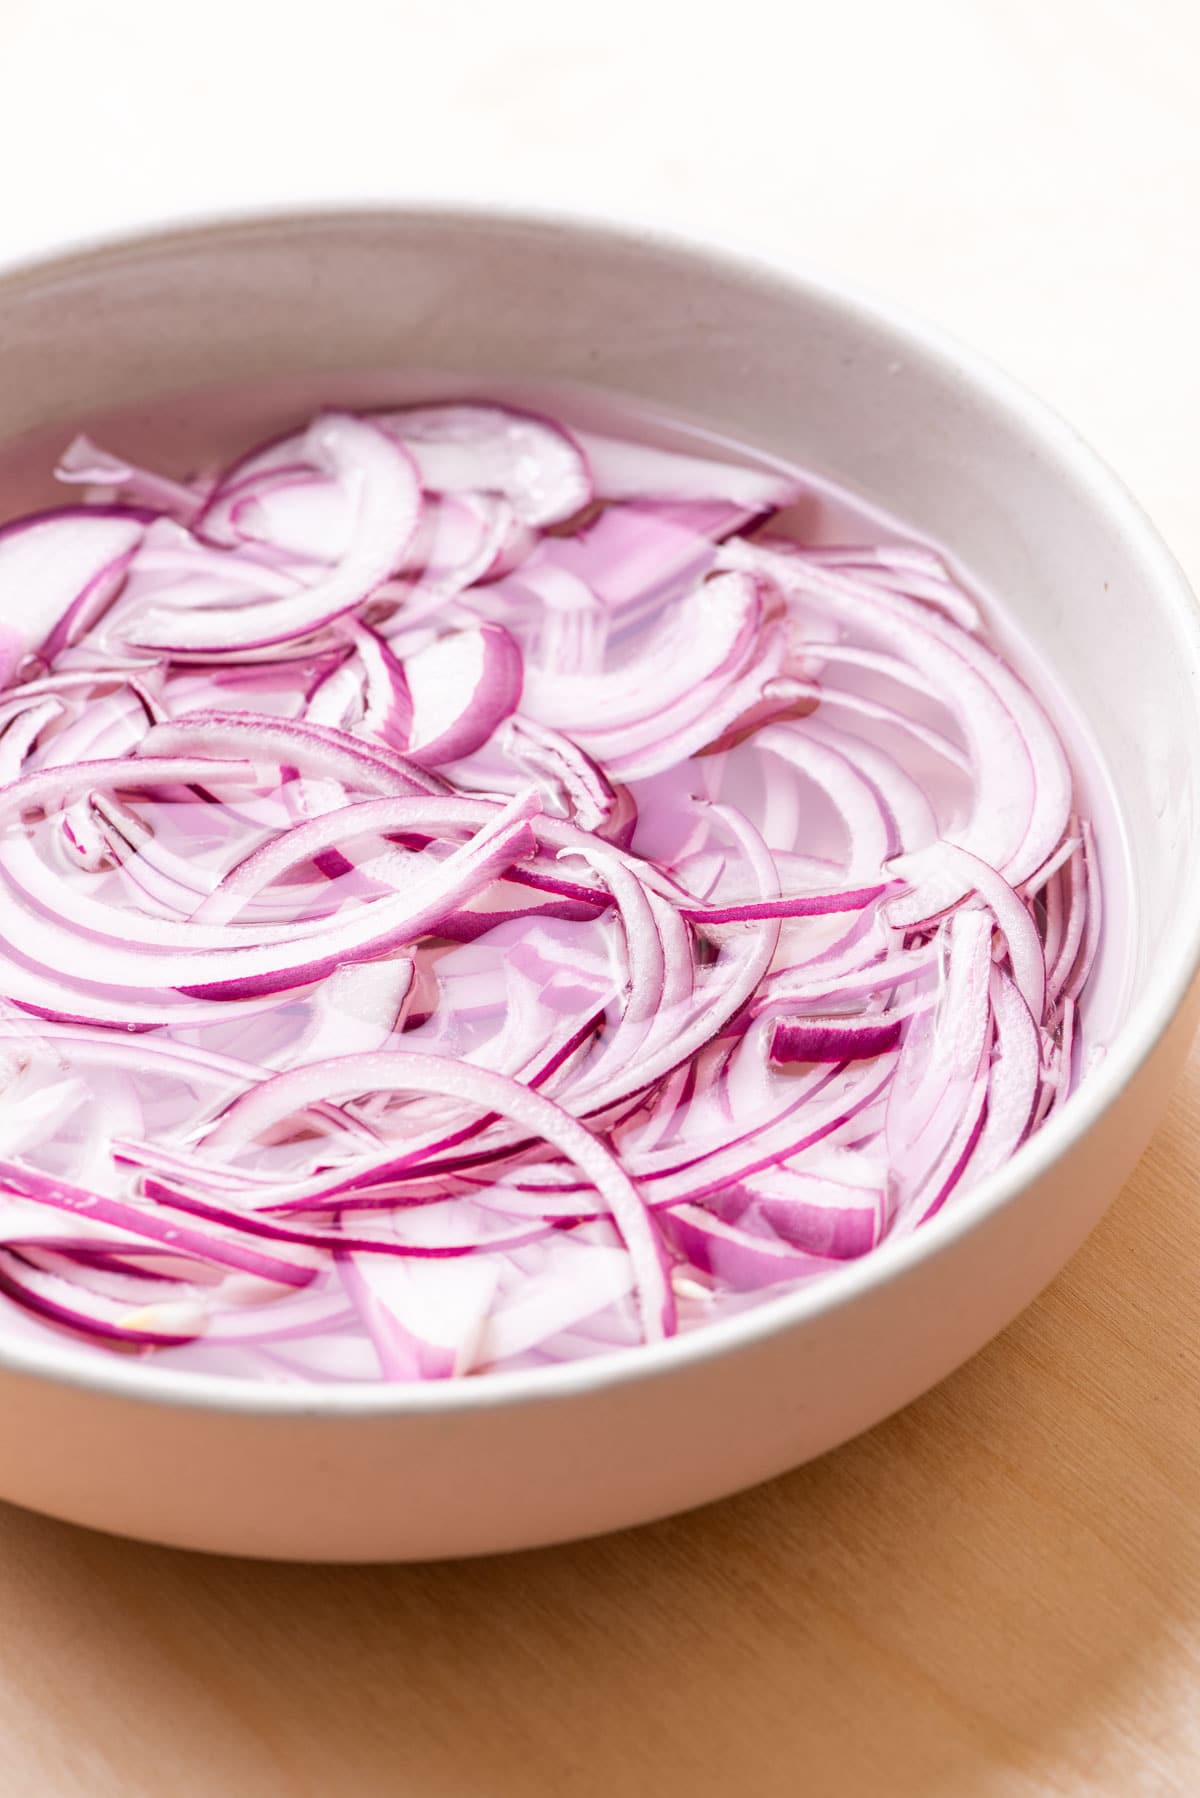 Red onions pickling in vinegar in a bowl.